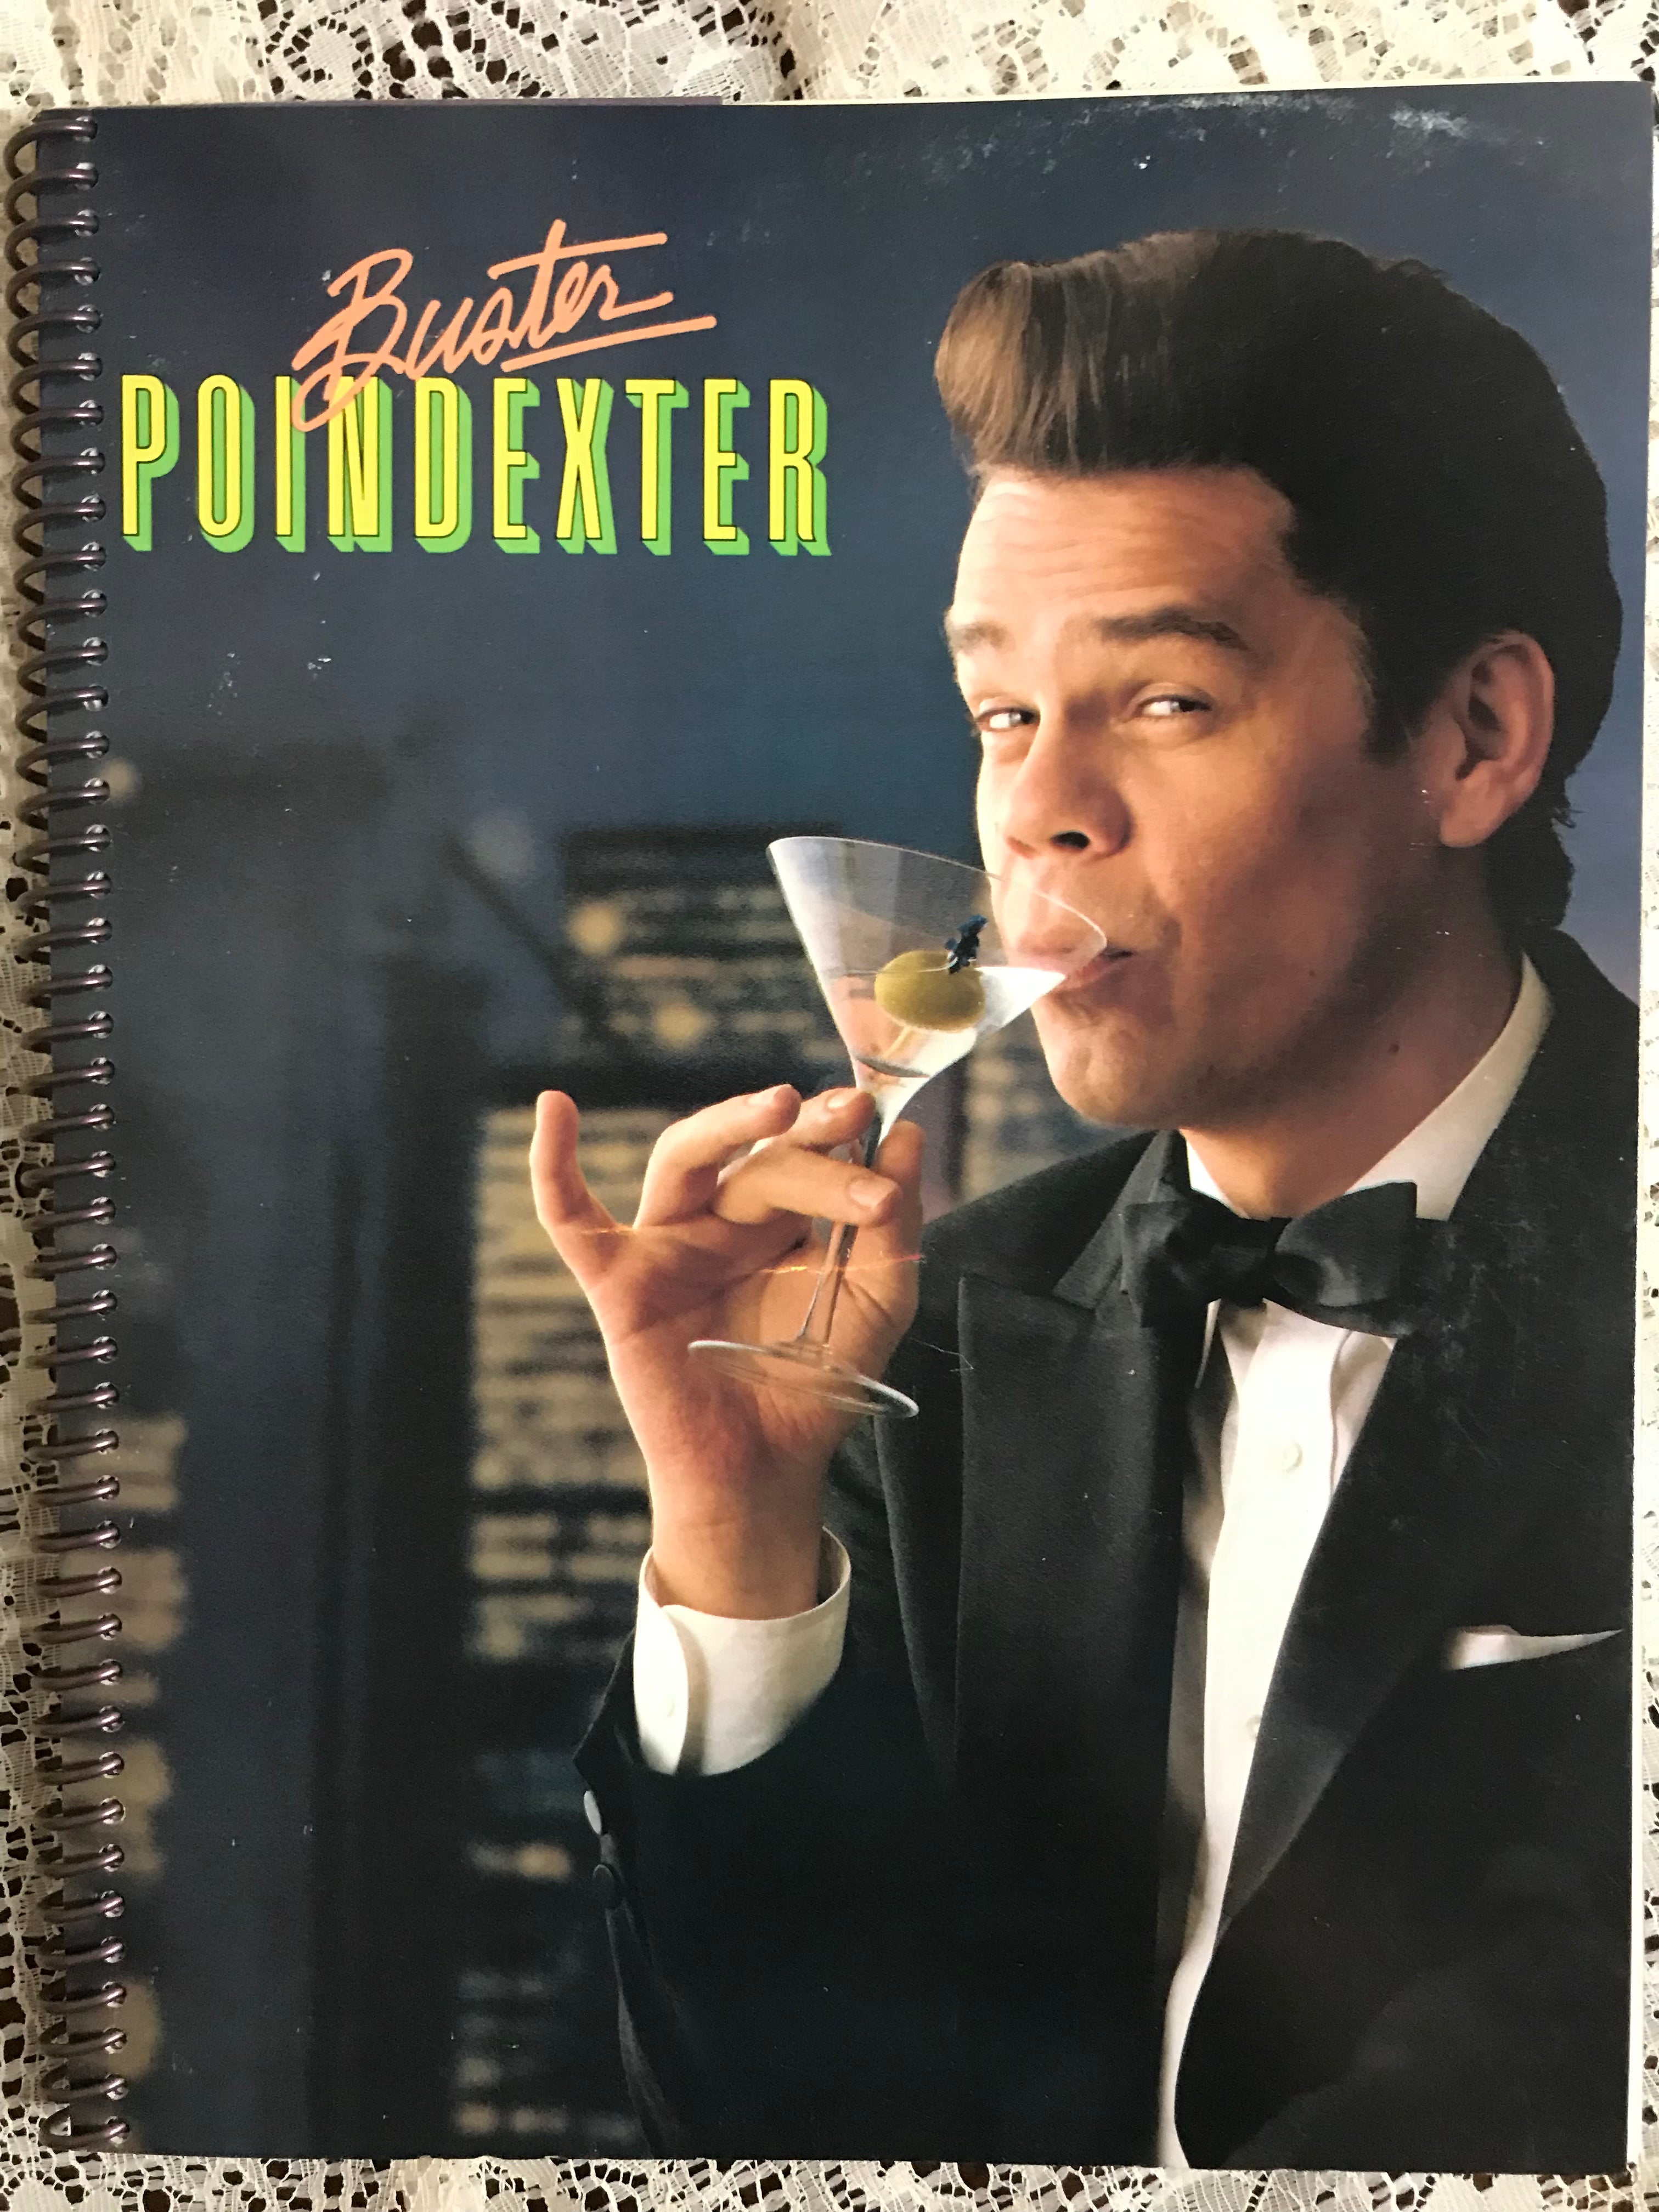 Buster Poindexter Album Cover Notebook